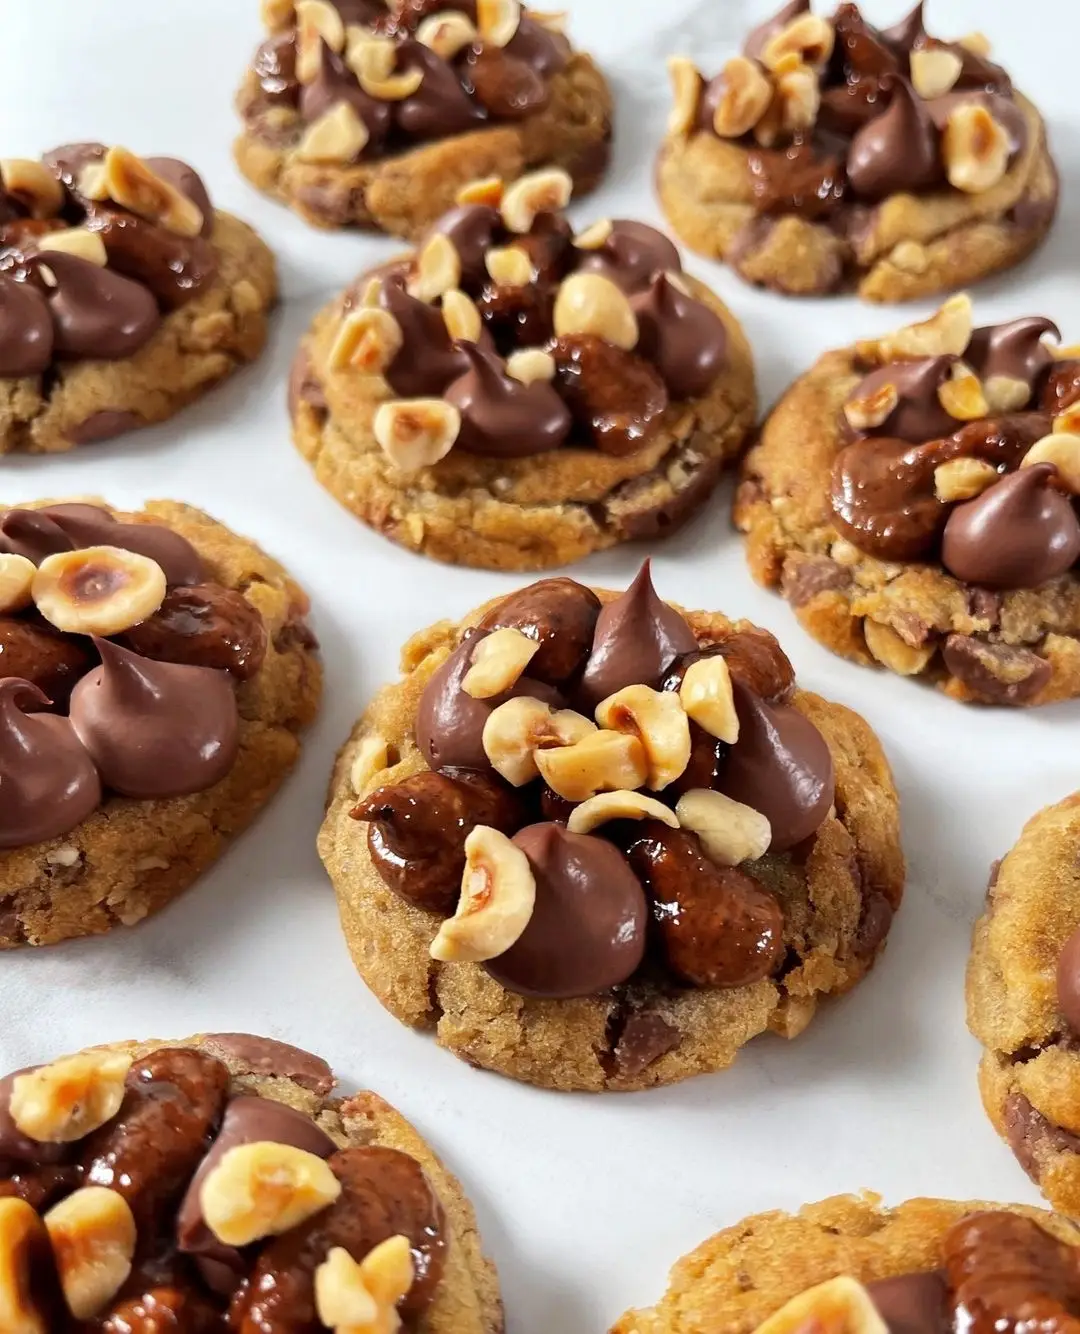 Top 10 Chocolate Chip Cookie Recipes ...